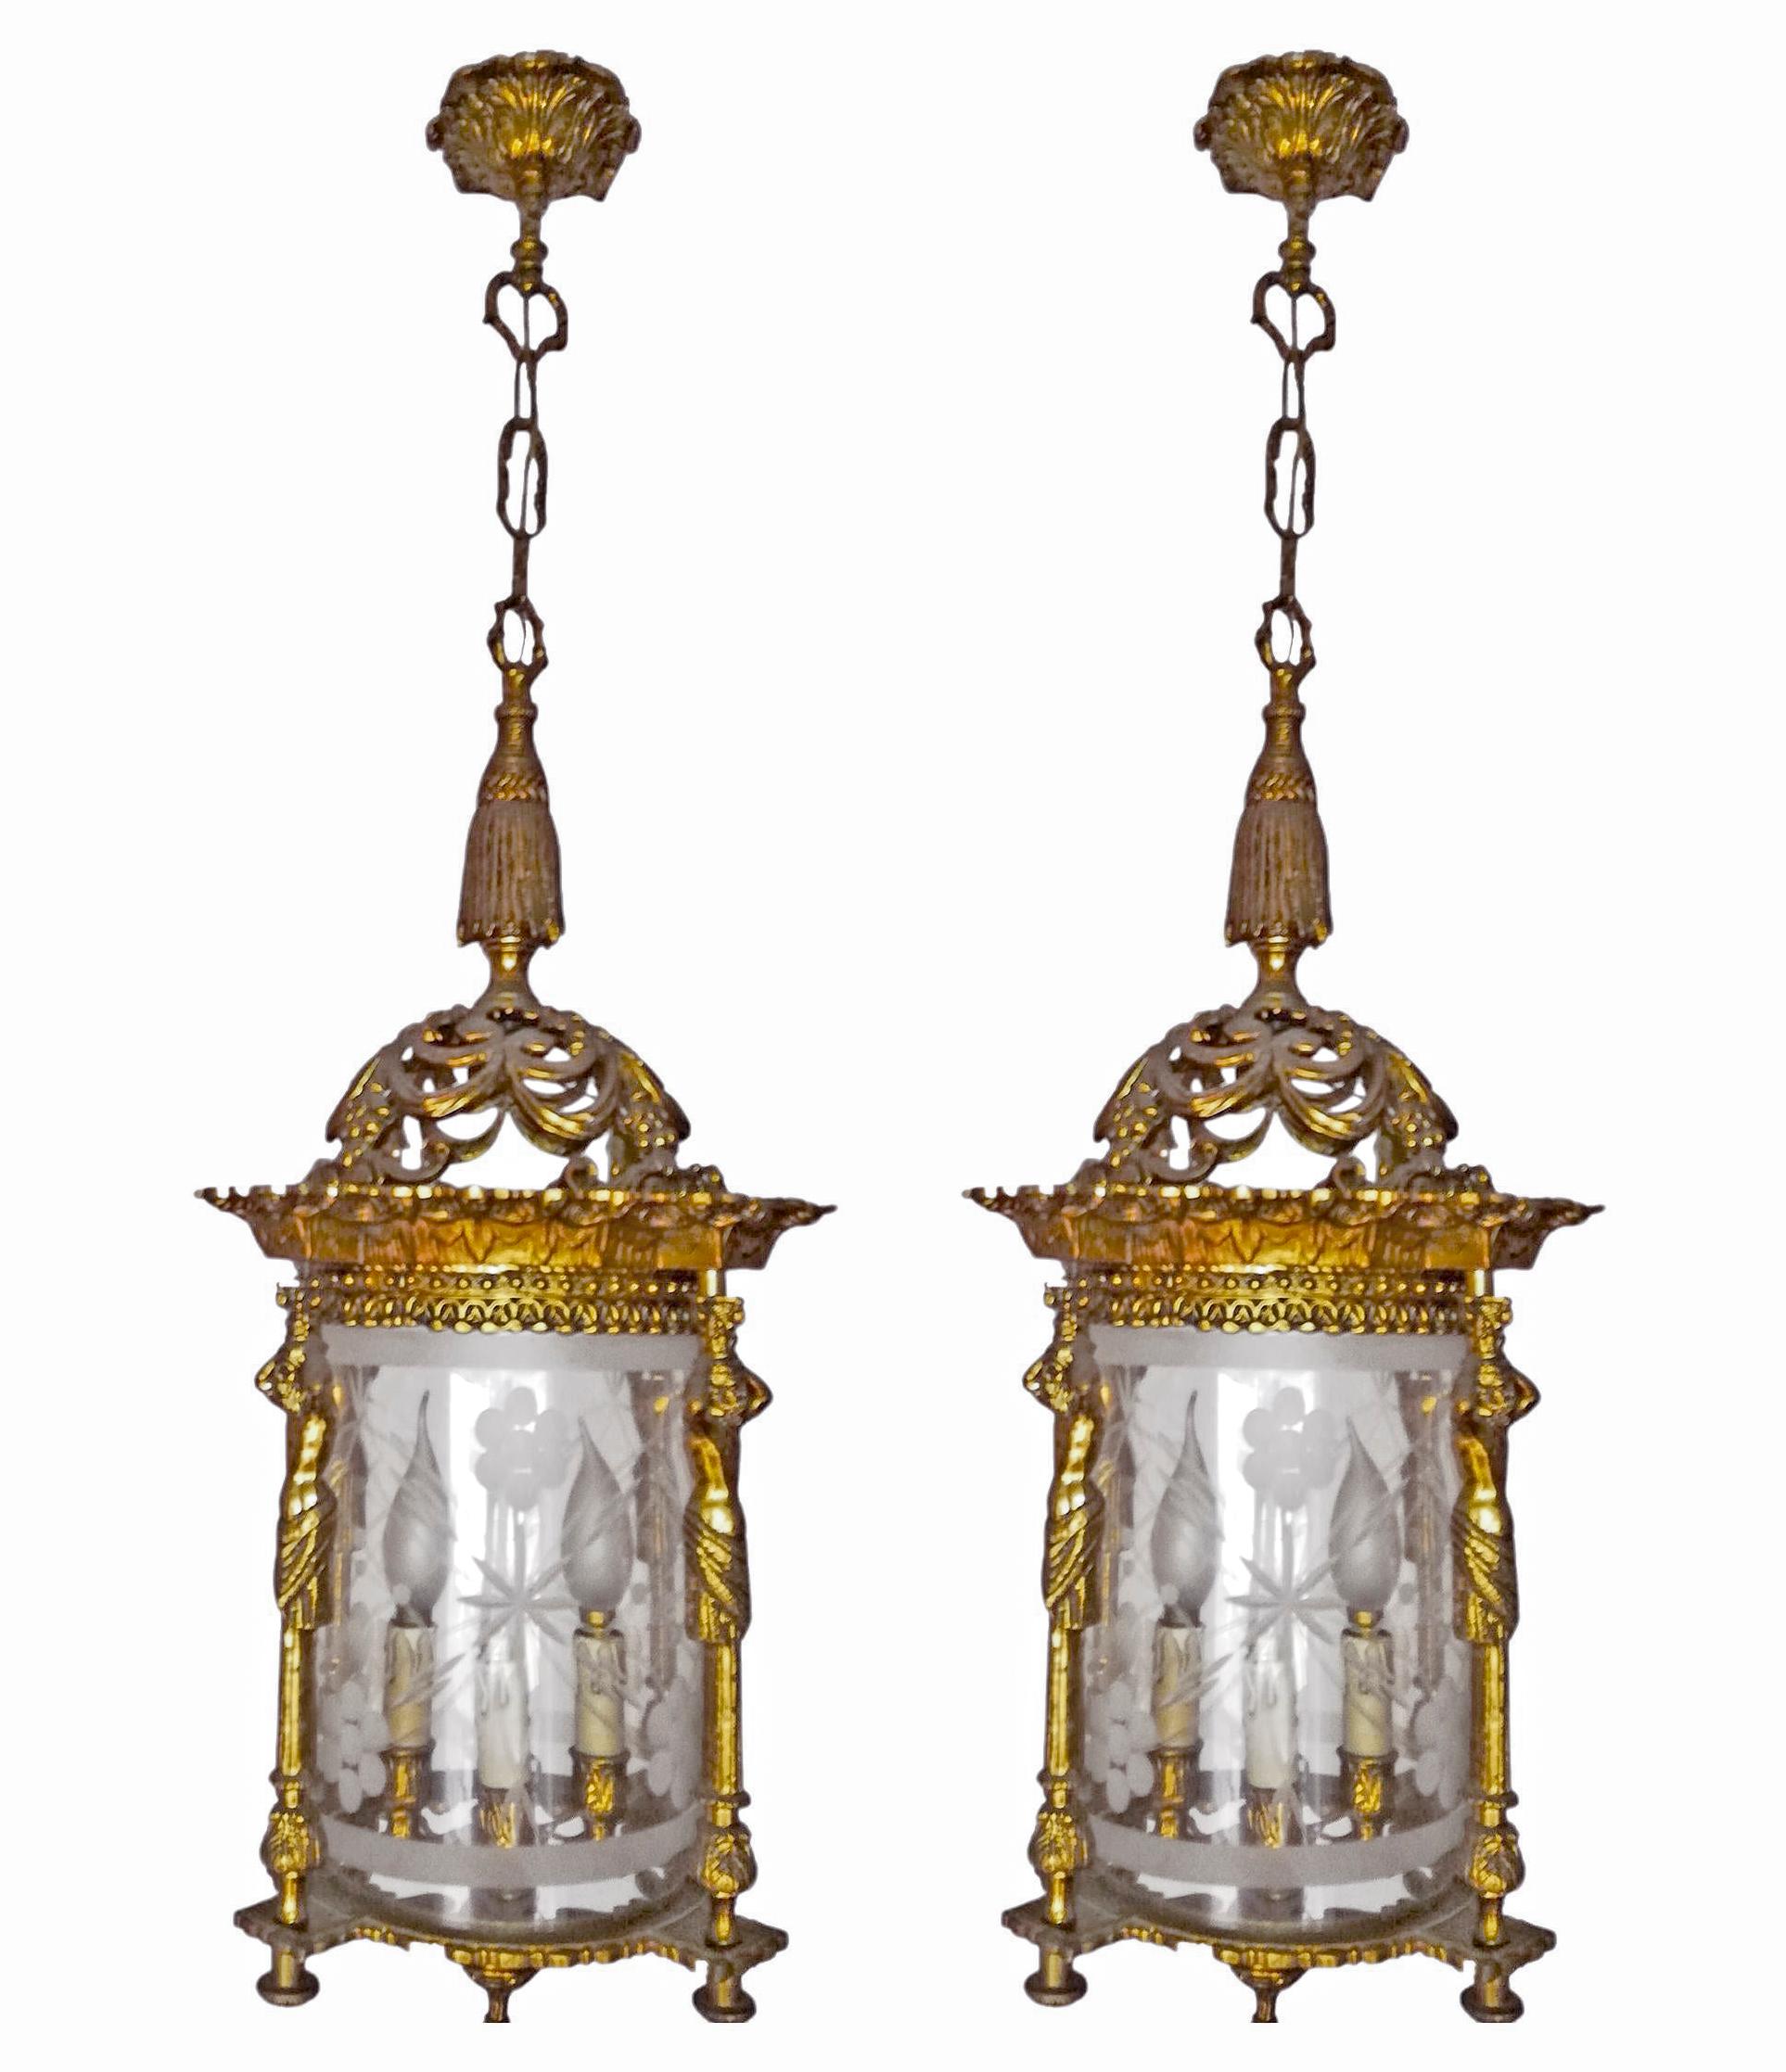 Beautiful pair of antique large French Empire caryatids cast bronze lanterns. Fire gilded solid heavy bronze and cut glass shade with four-light.
Measures:
Diameter 12 in/ 30 cm
Height 32 in/ 80 cm
Weight: 12 Kg / 25 lb/ each
Four-light bulbs E-14 /